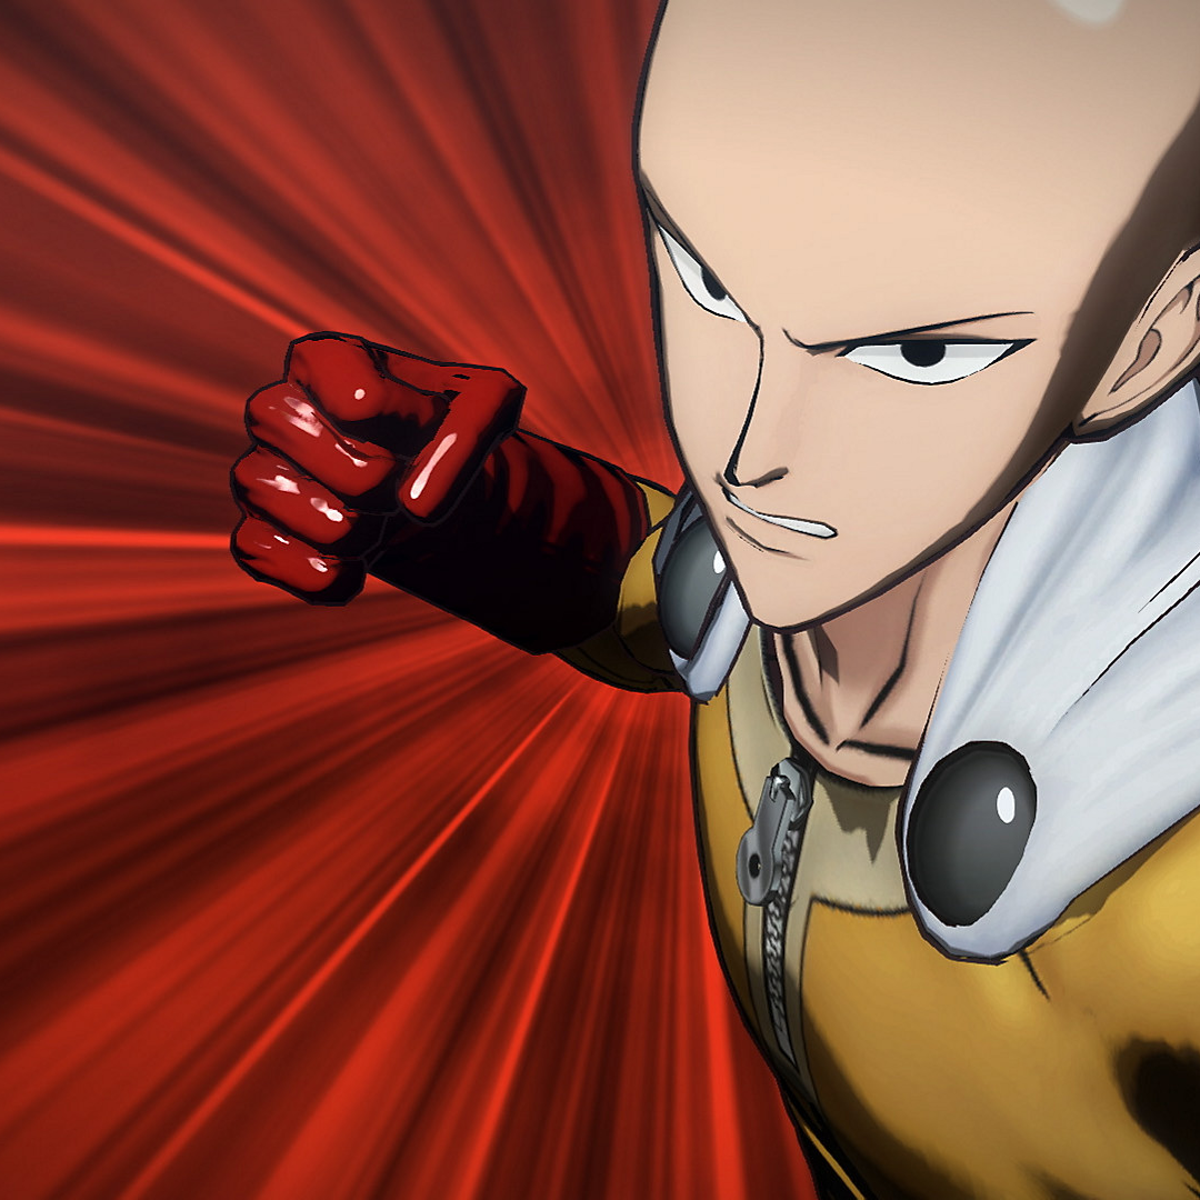 One Punch Man Is the Next Must-See Anime Show